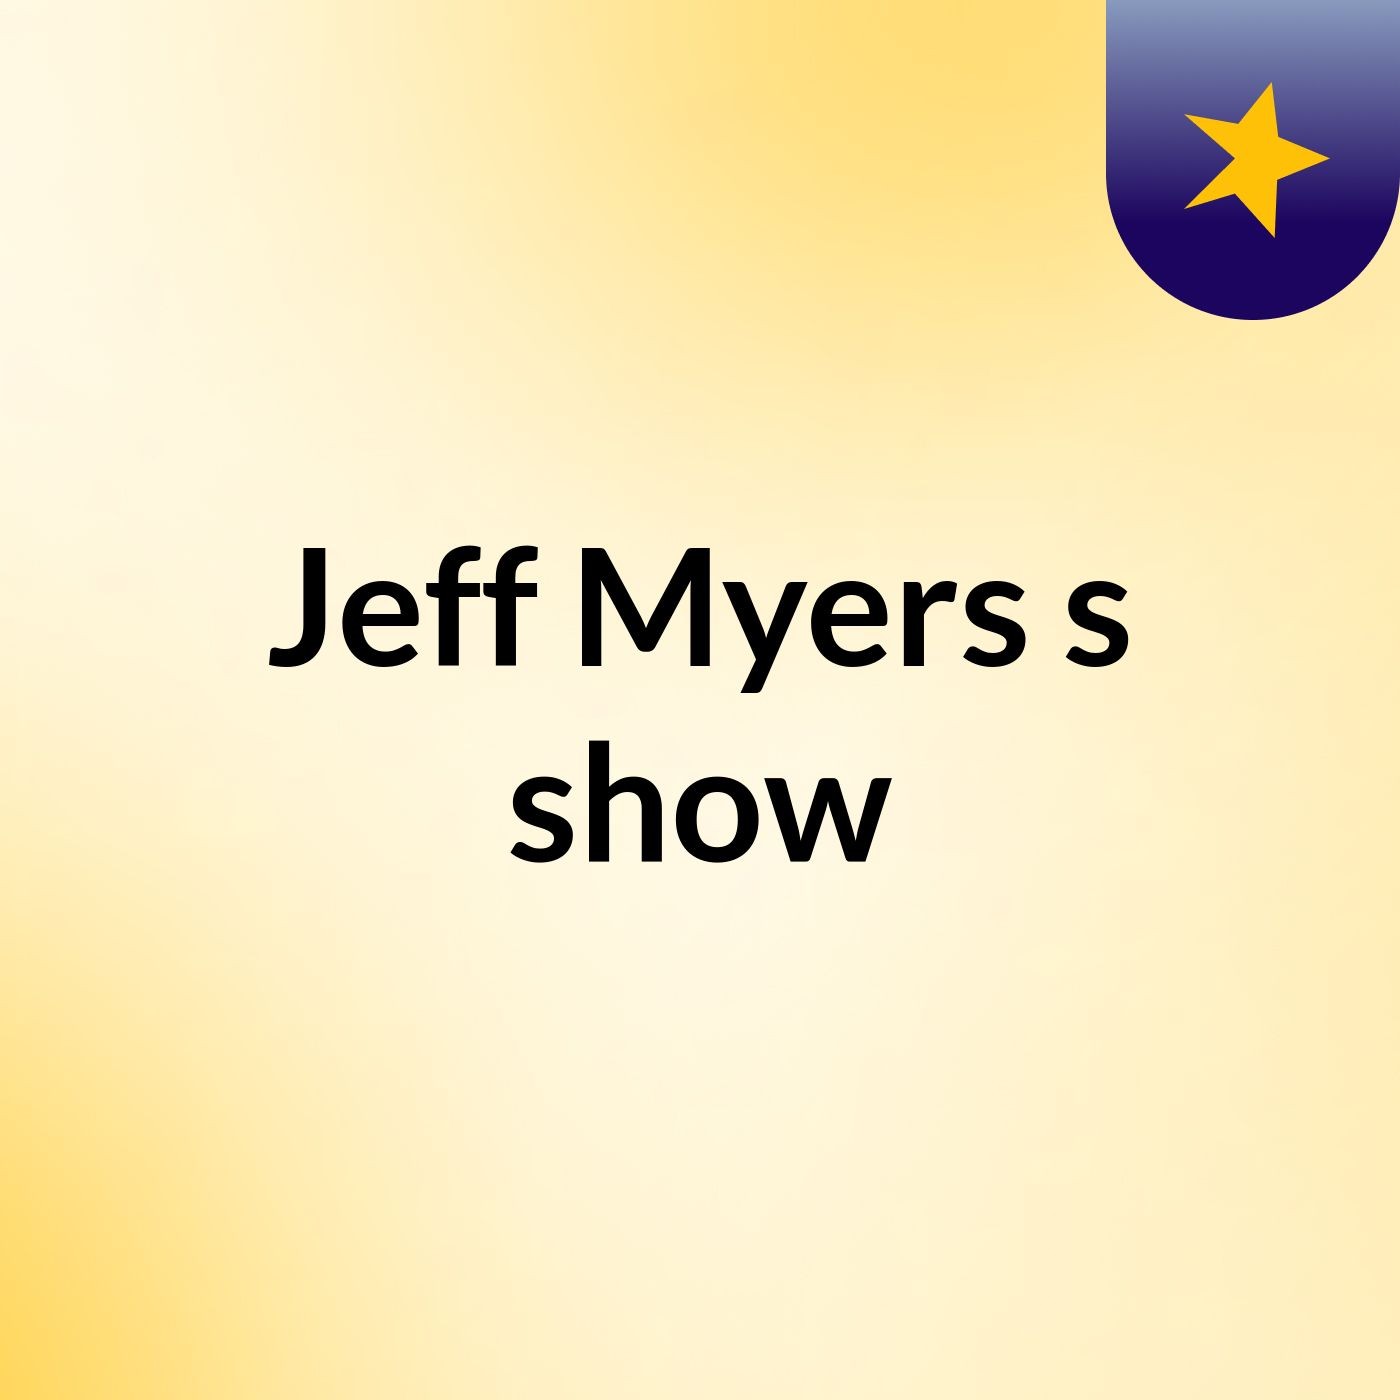 Jeff Myers's show